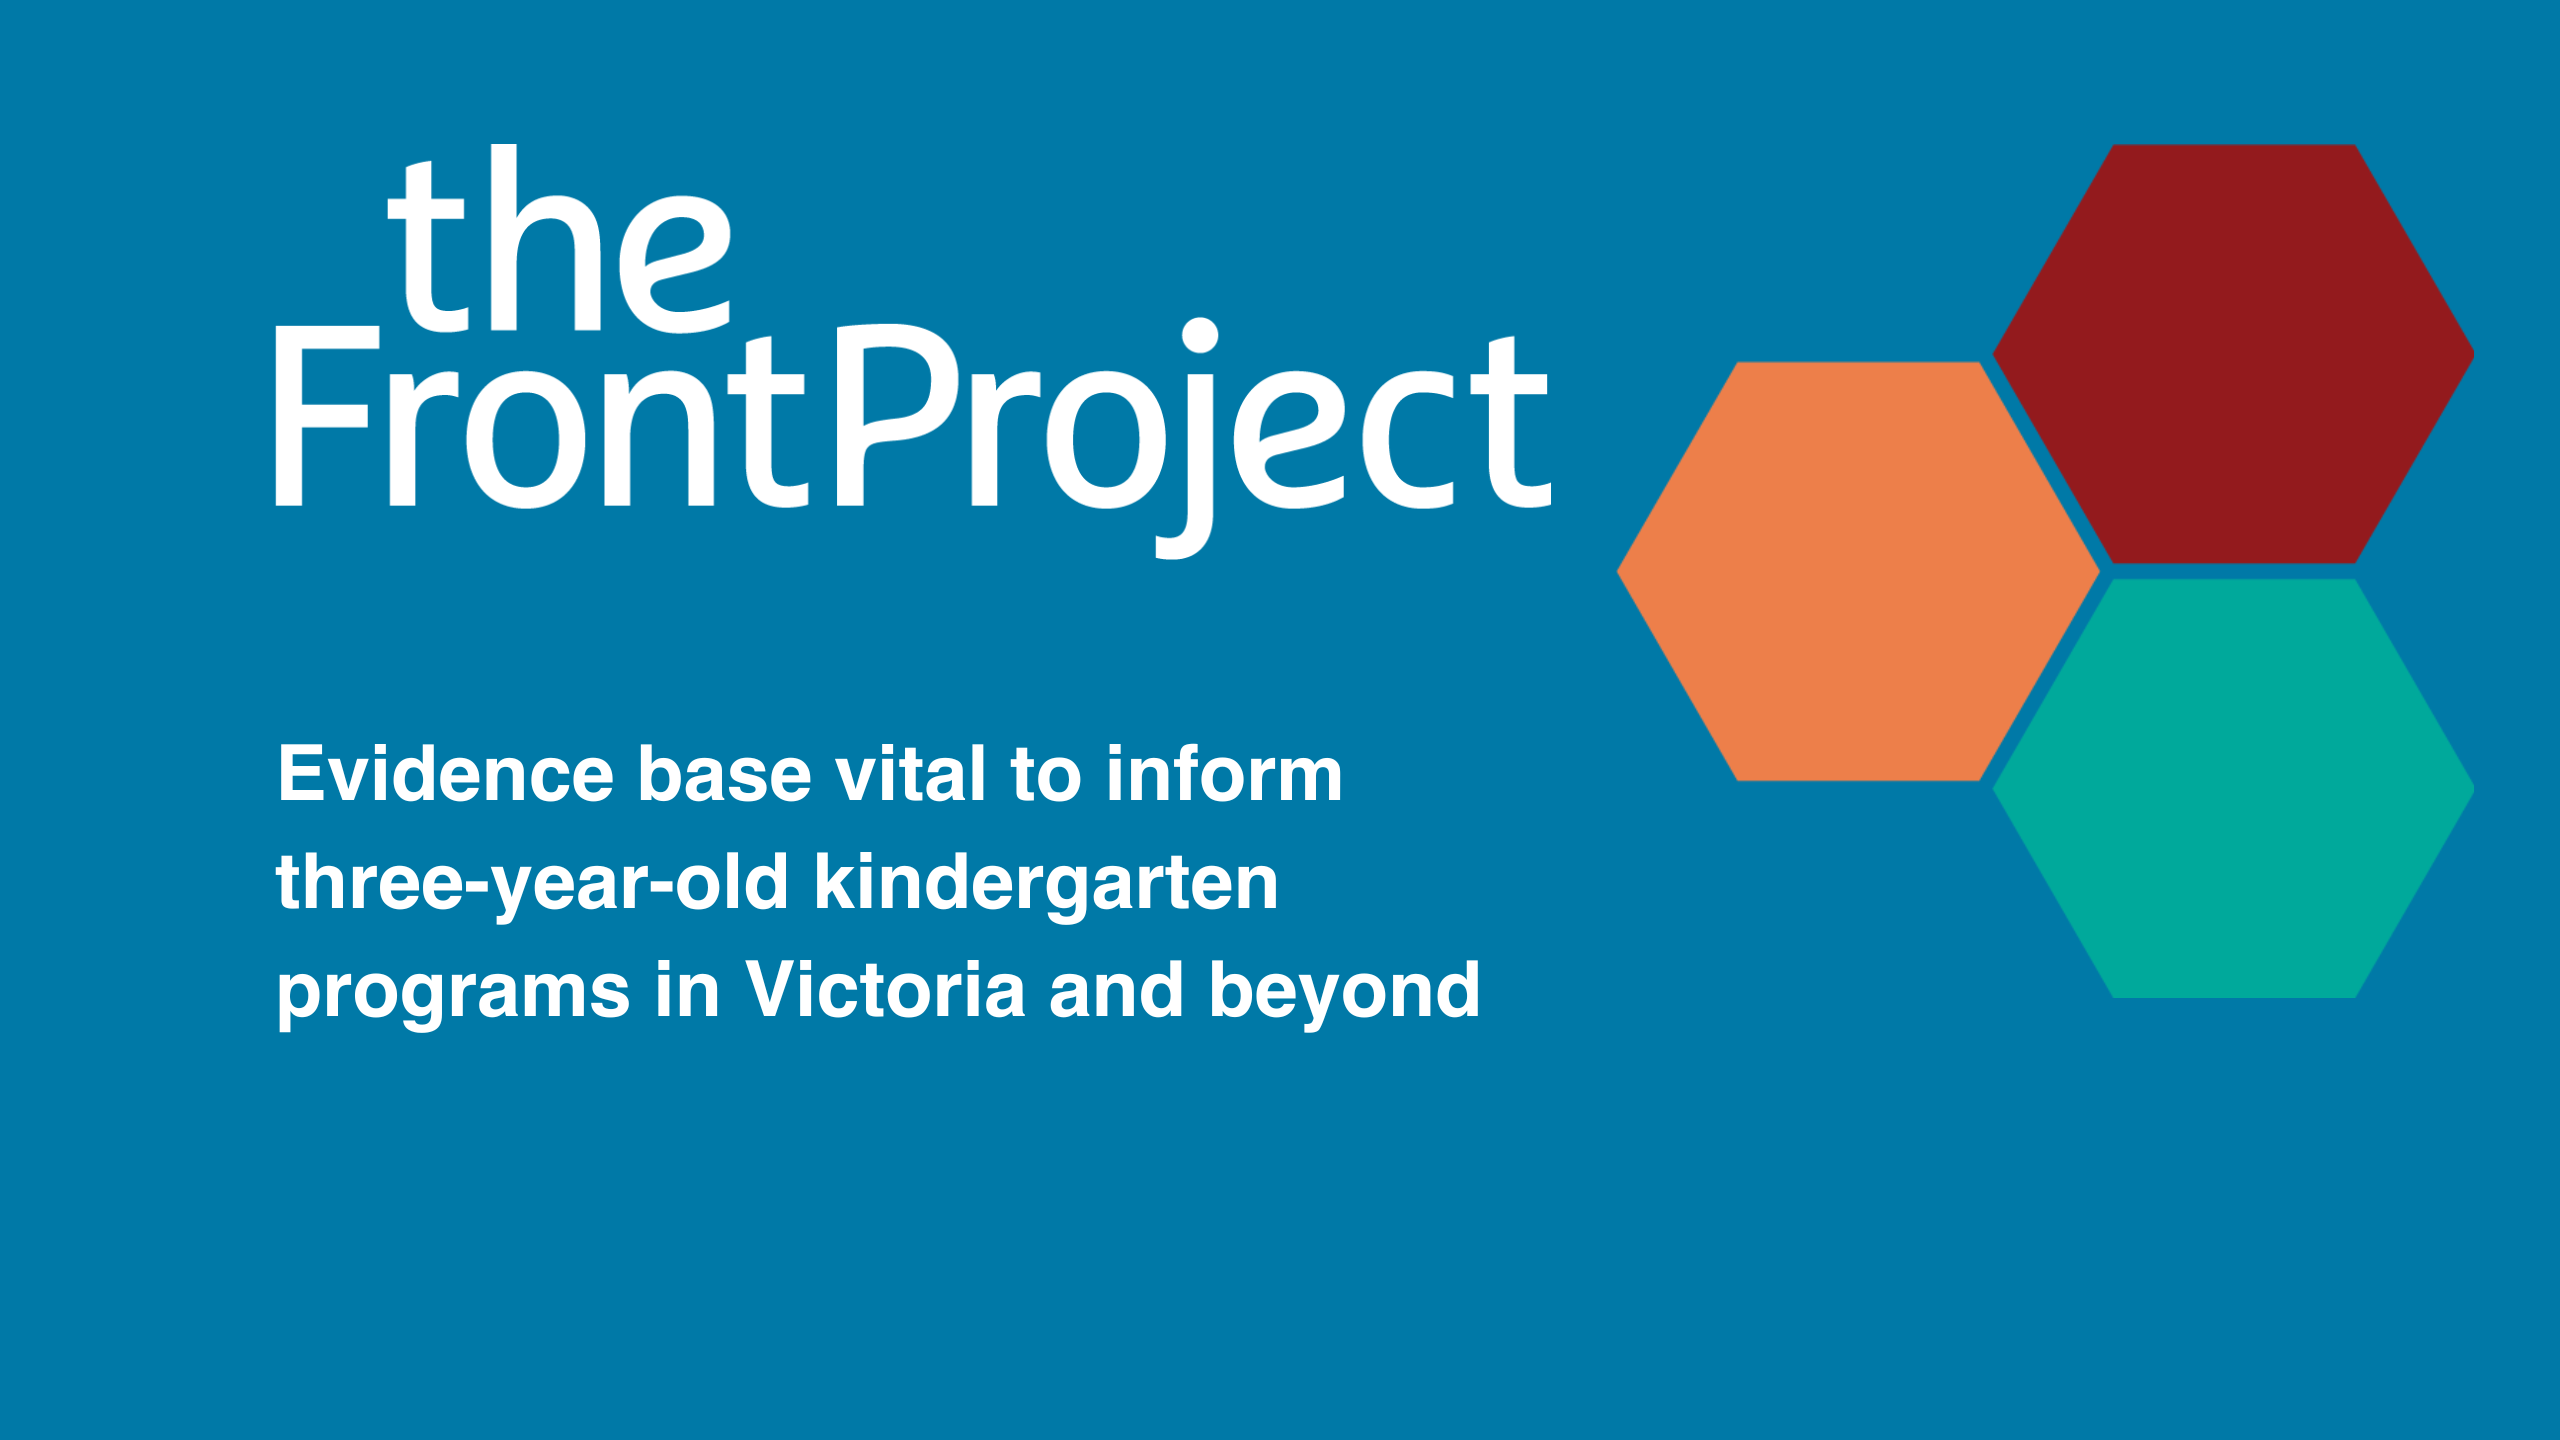  Evidence base vital to inform three-year-old kindergarten programs in Victoria and beyond